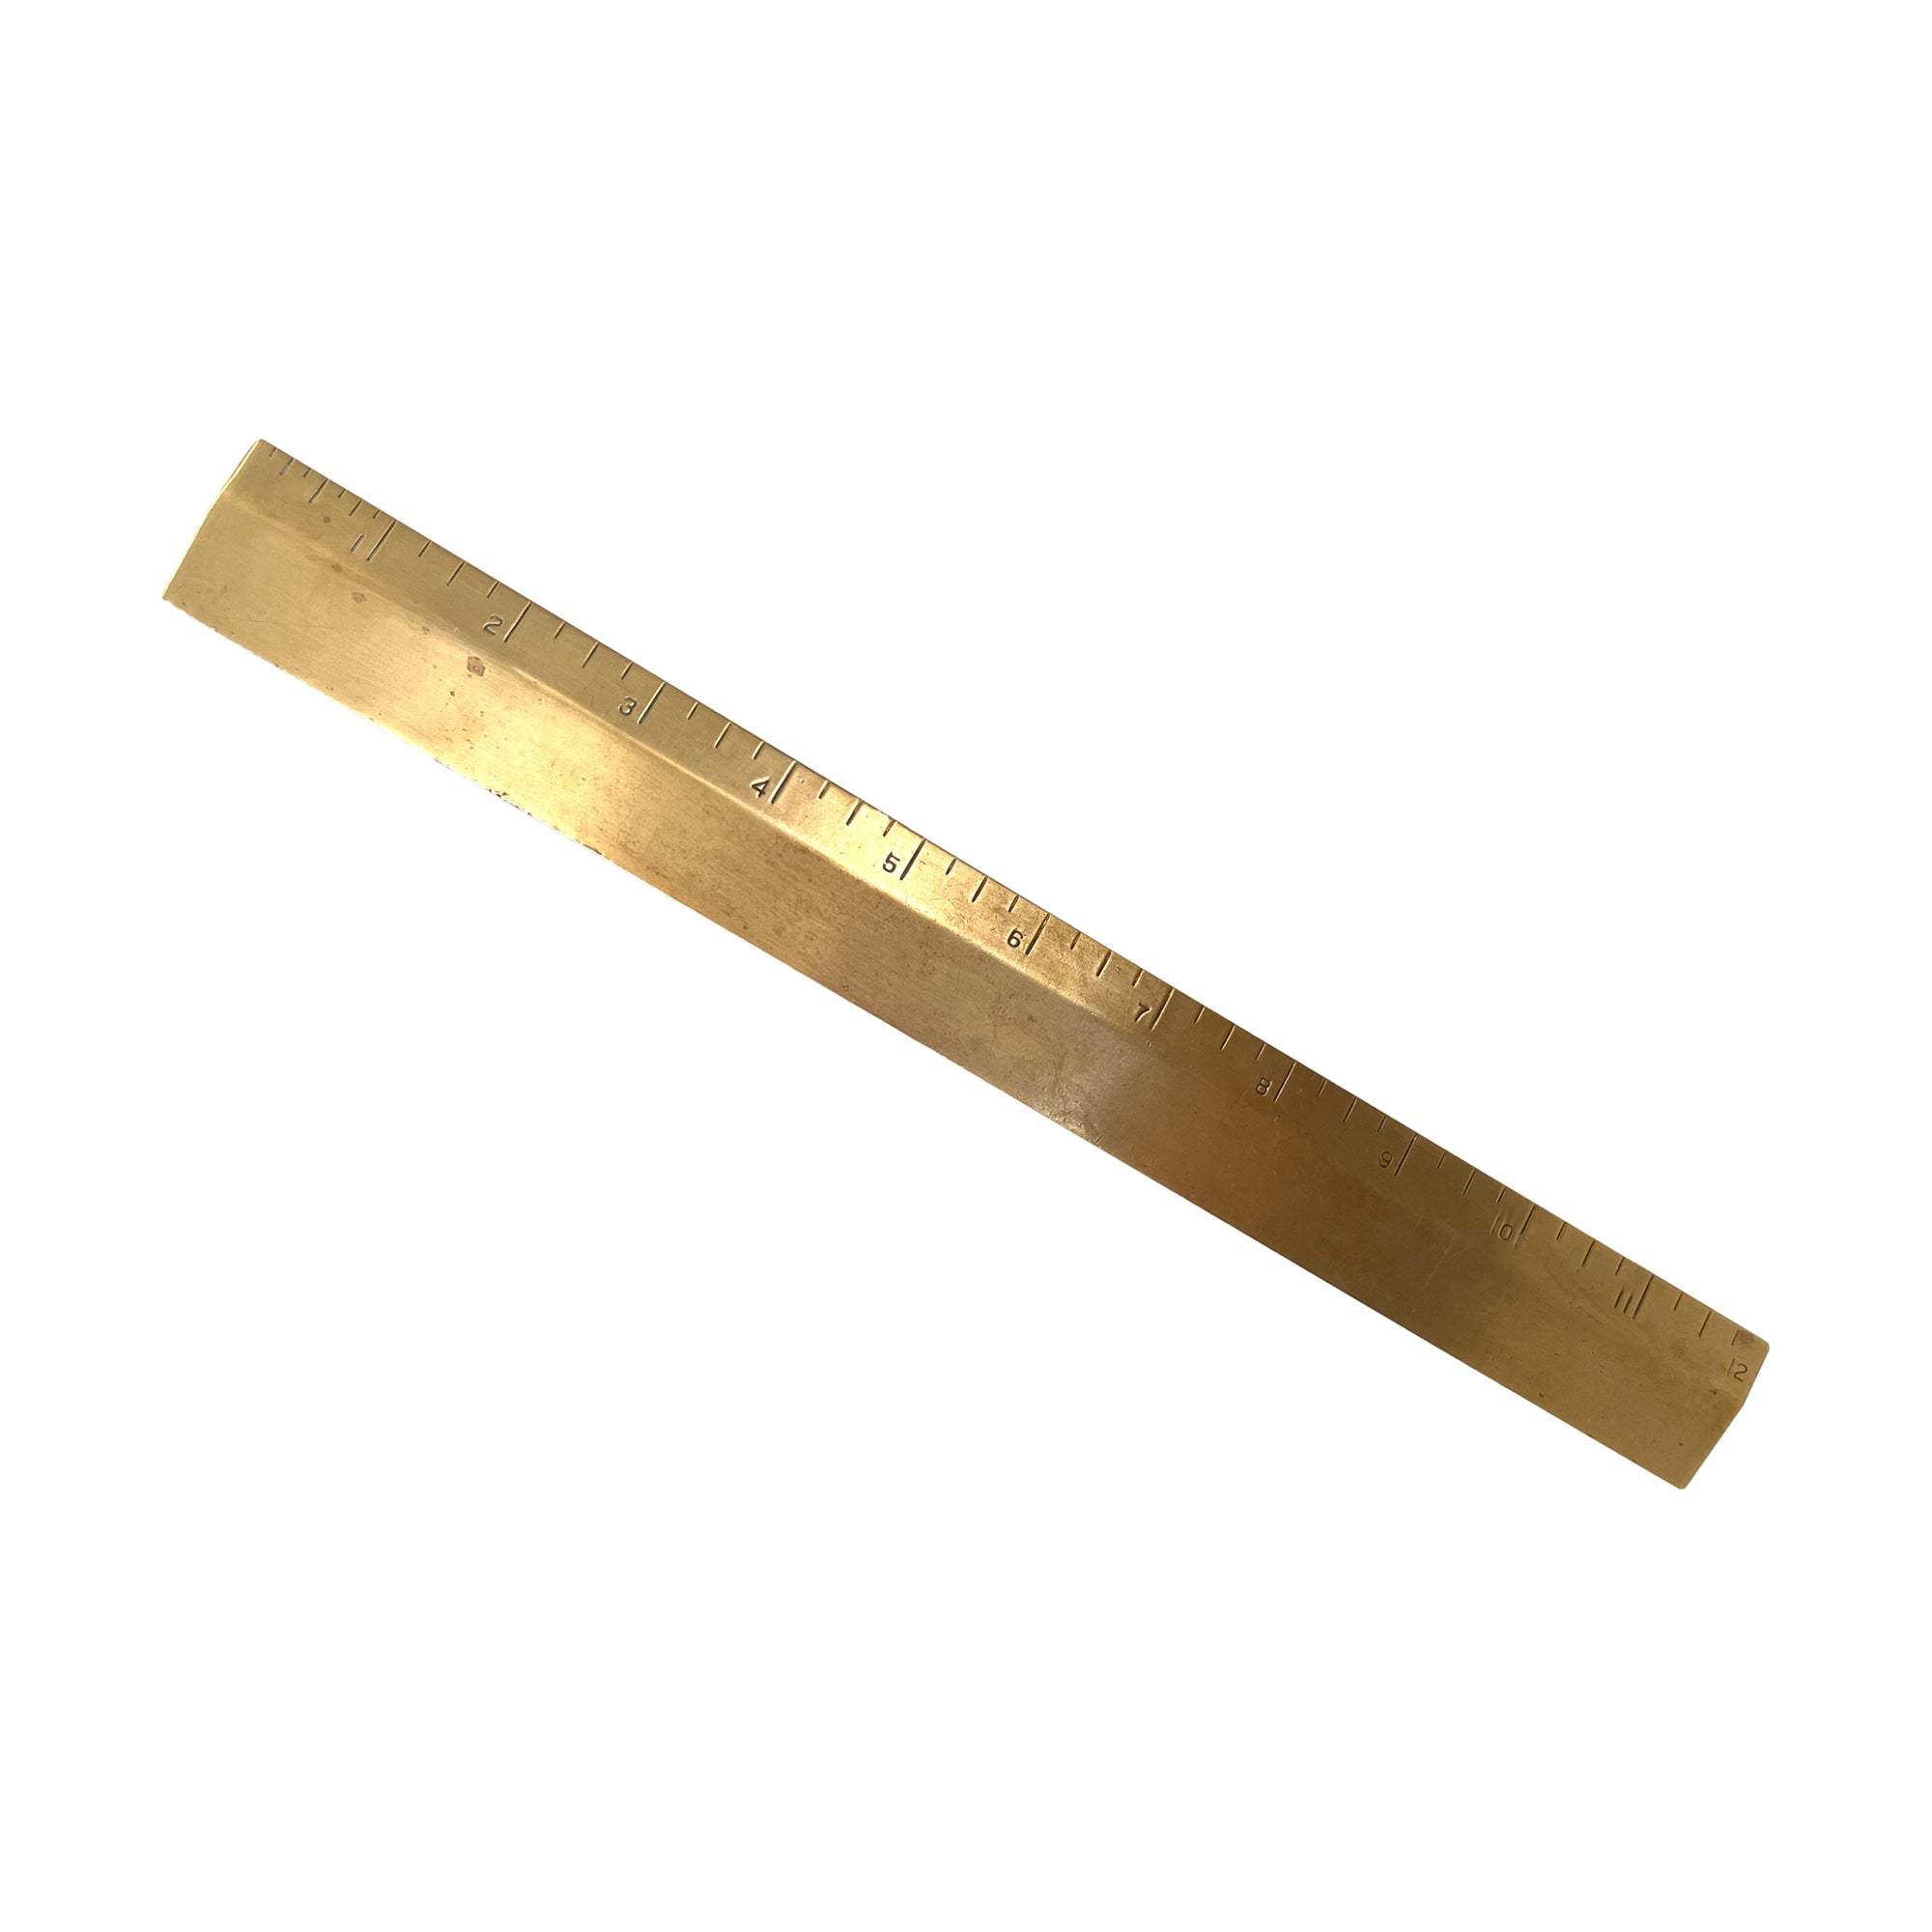 Solid Brass Ruler Paperweight